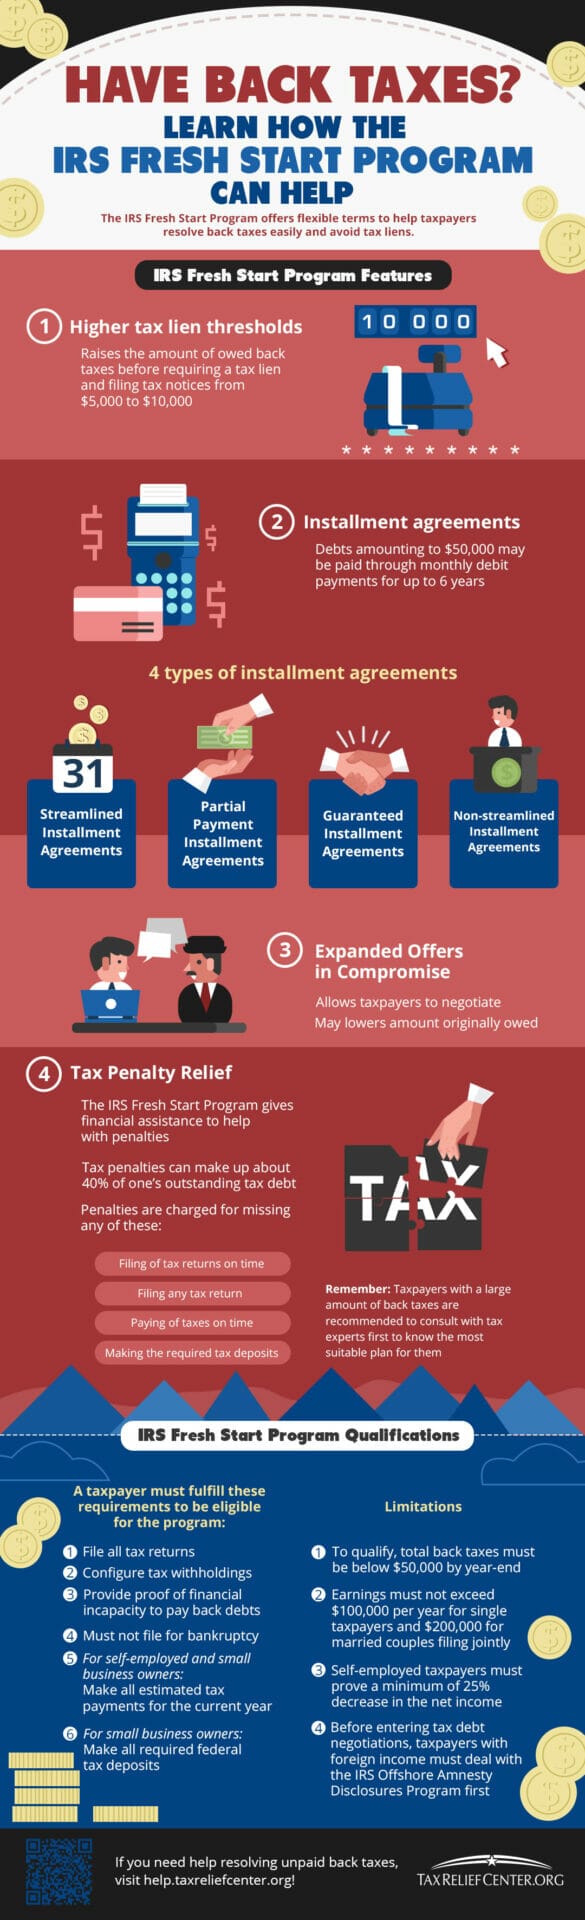 infographic | The IRS Fresh Start Program | How Does It Work?